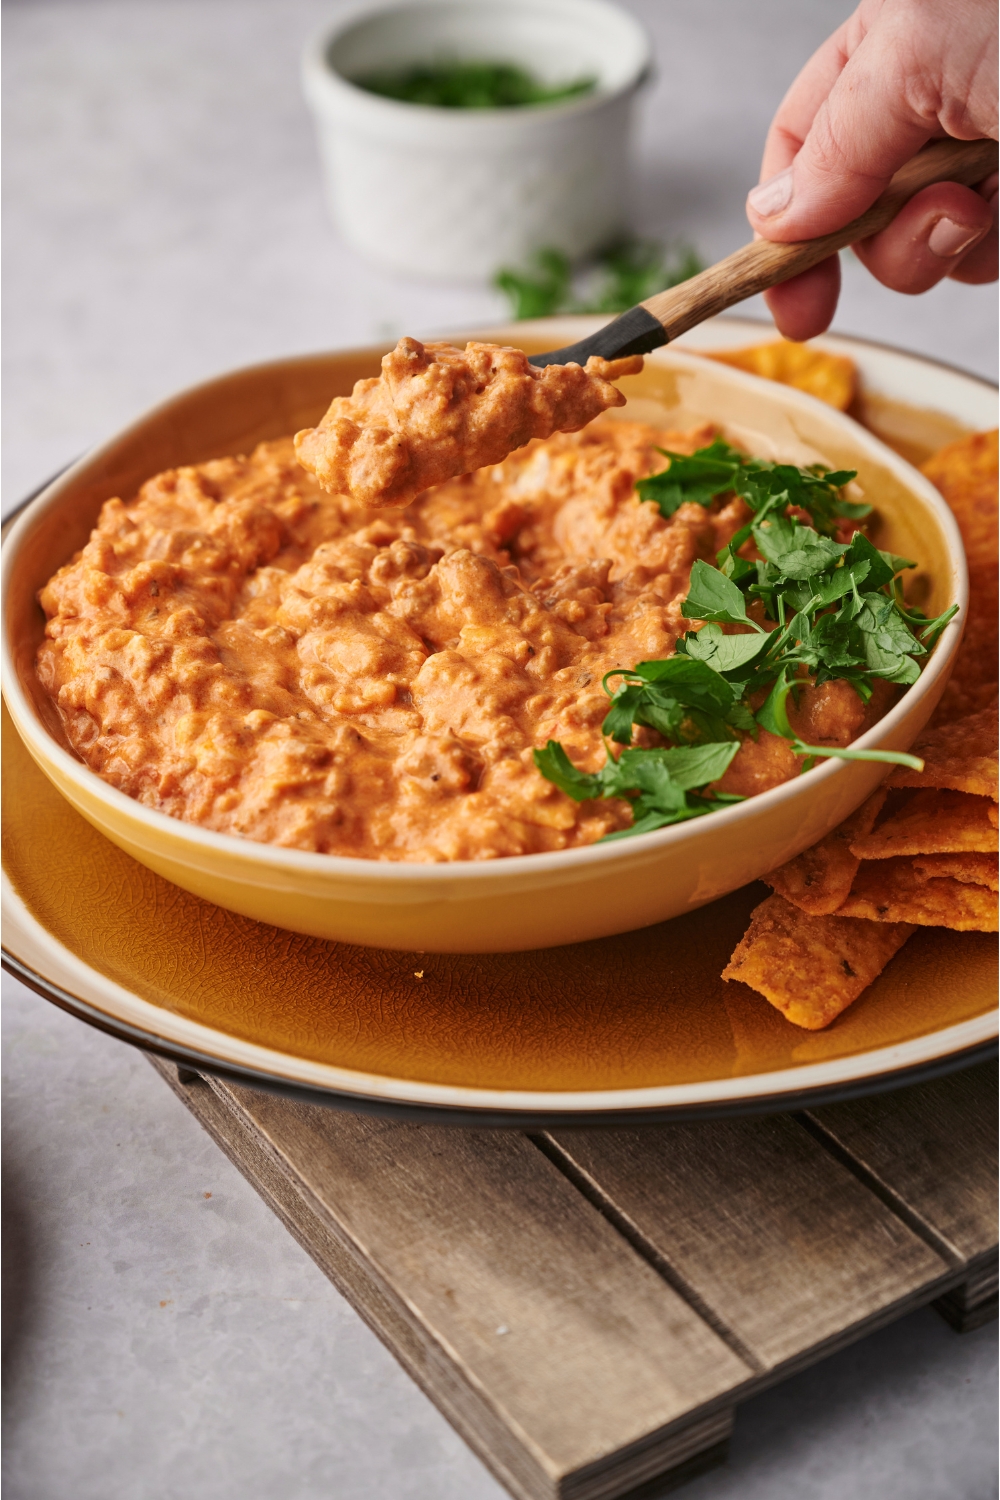 Hand scooping a spoonful of chili cheese dip out of the serving bowl filled with dip.